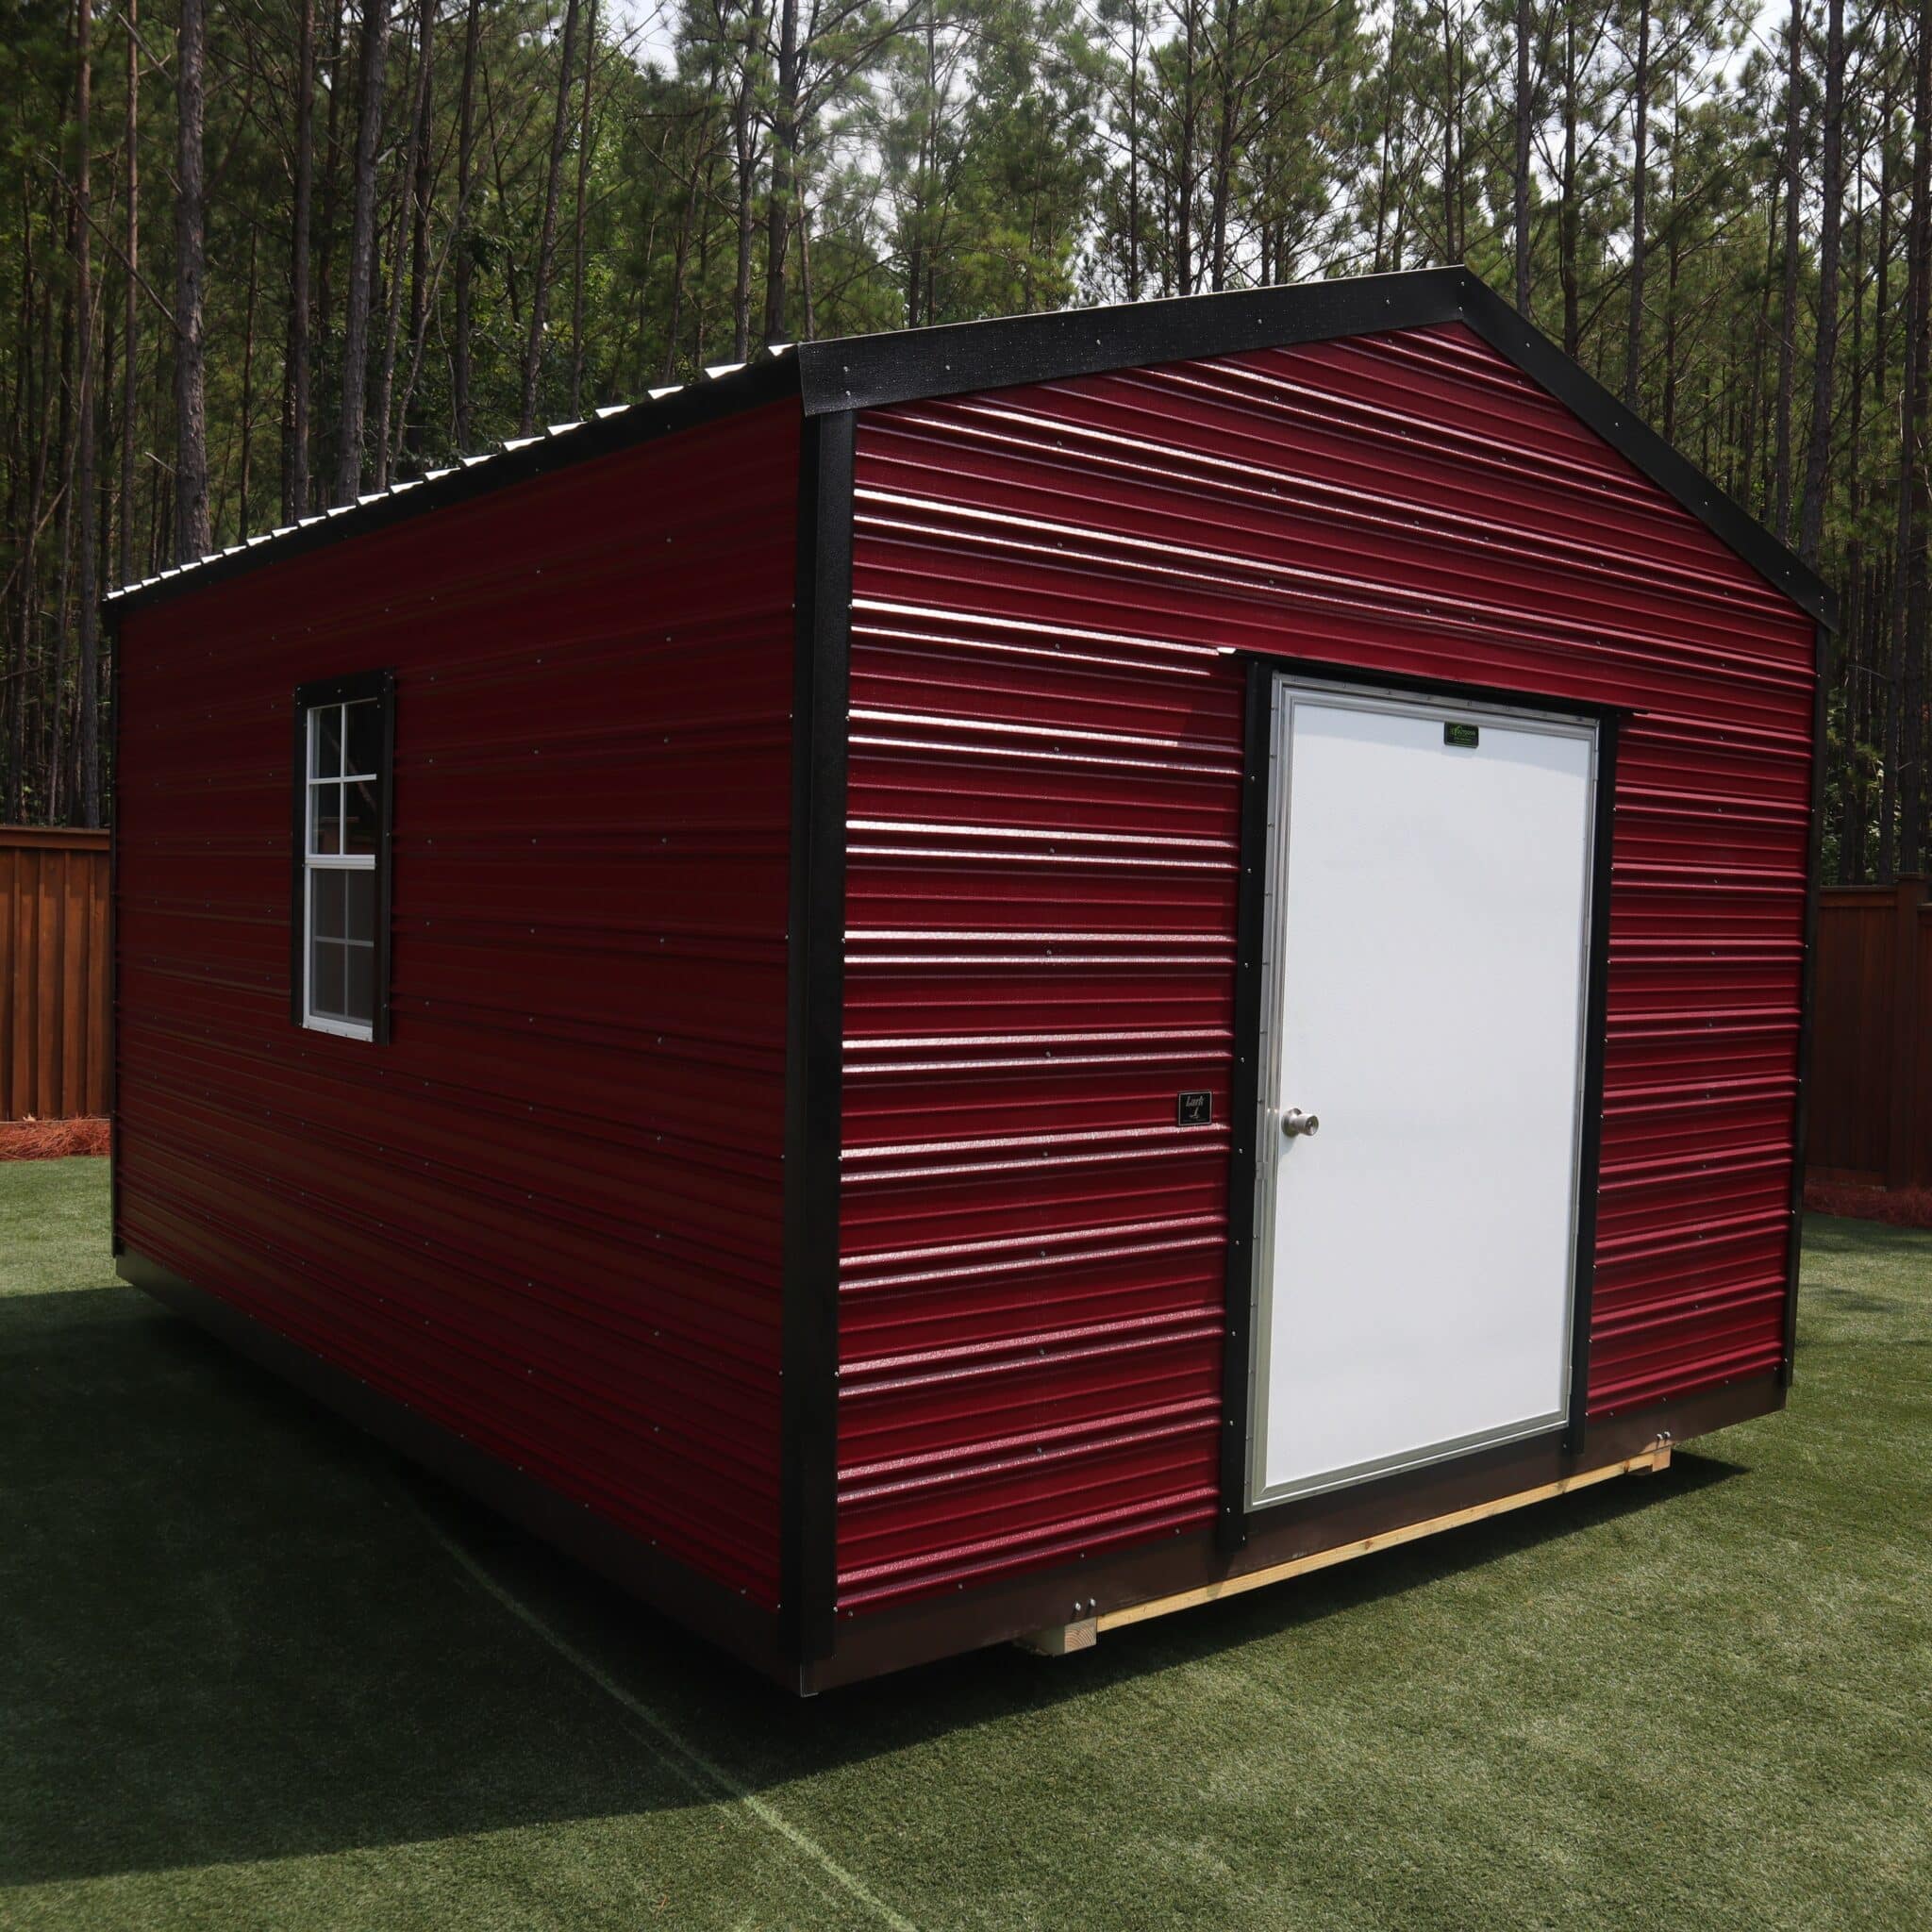 OutdoorOptions Eatonton Georgia 31024 Shed Picture Replace 124 Storage For Your Life Outdoor Options